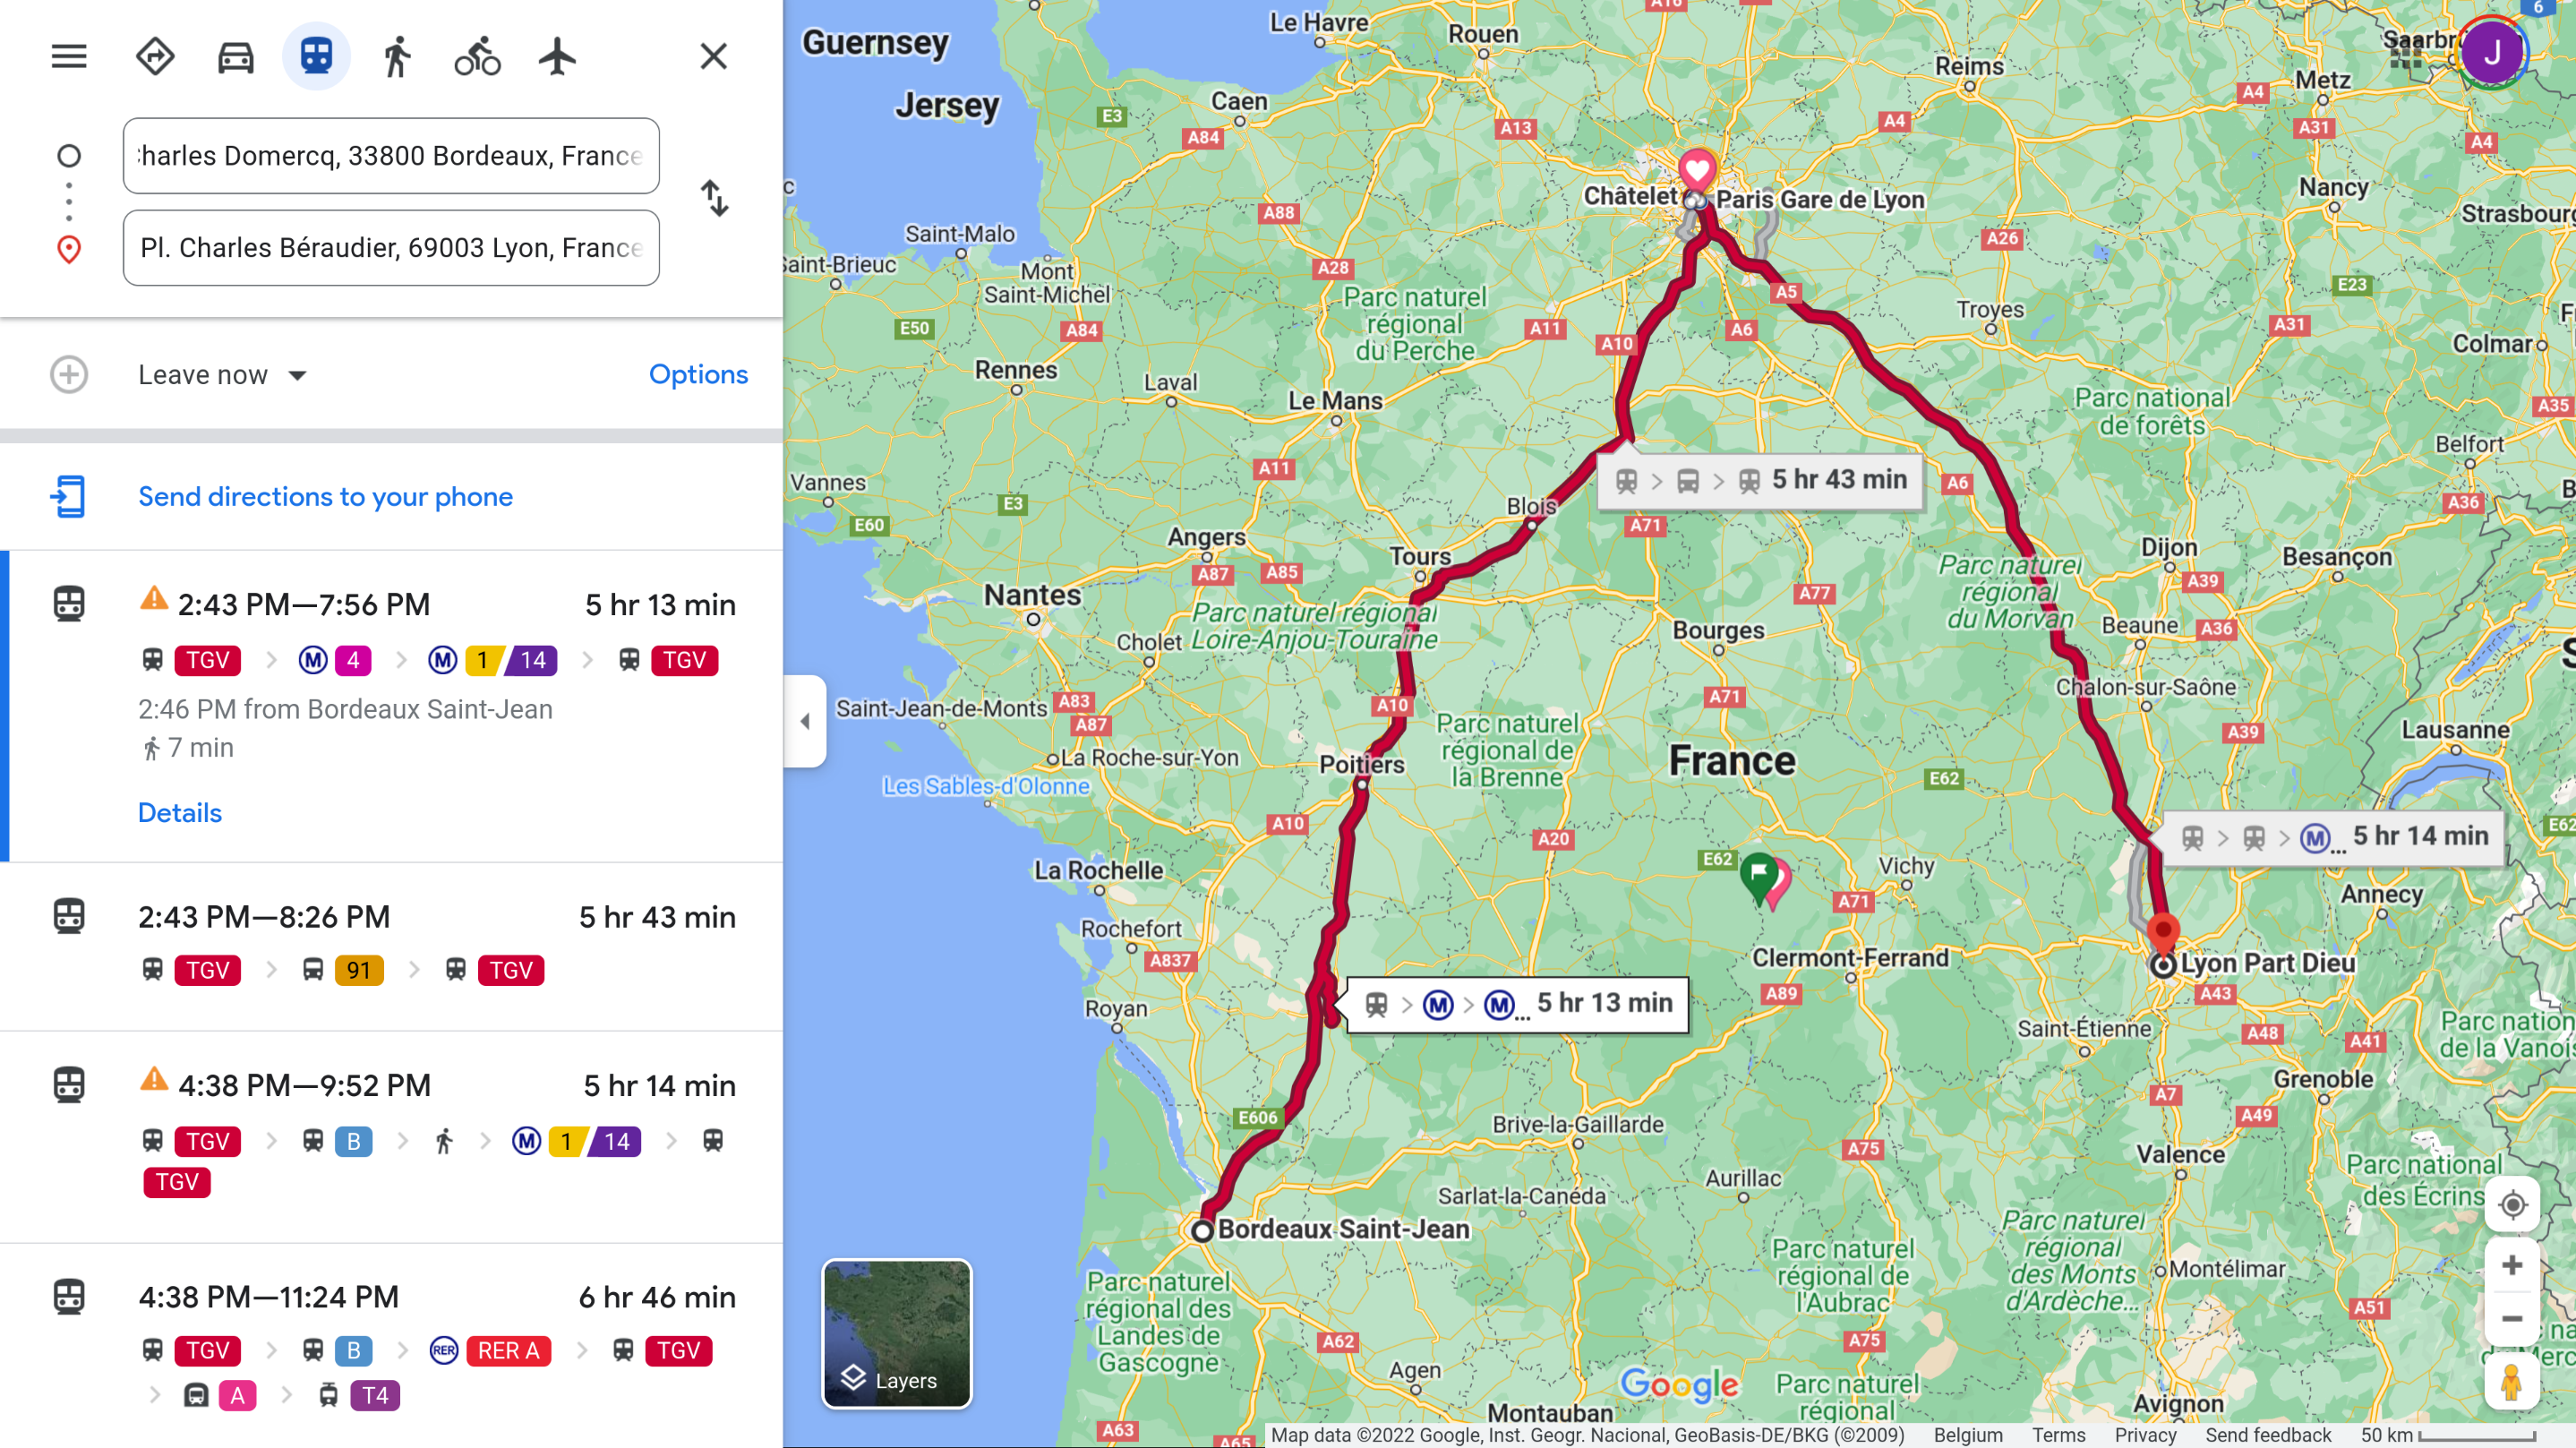 To anyone living outside of France, this route would seem insane, unfortunately it is the only option the SNCF offer.